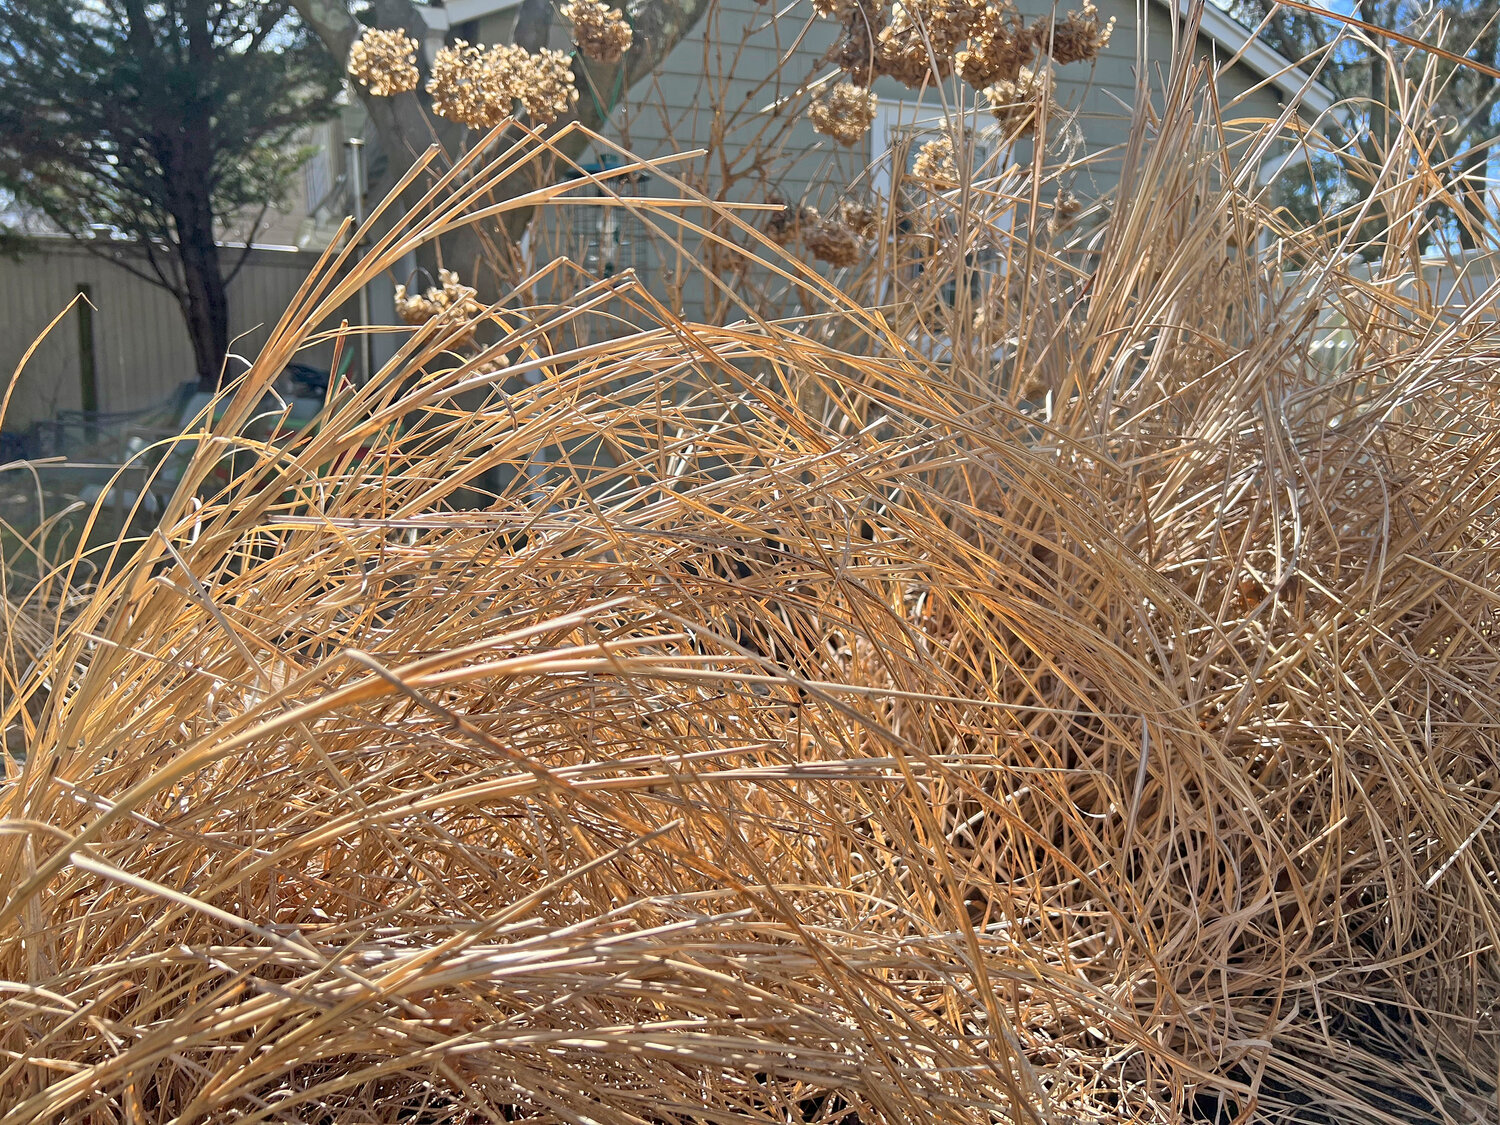 This March 15 photo shows ornamental grasses left standing in Jessica Damiano’s Long Island garden over winter. The dead foliage provides shelter for hibernating pollinators and other insects until they emerge from dormancy and resume their lifecycles in mid to late spring.